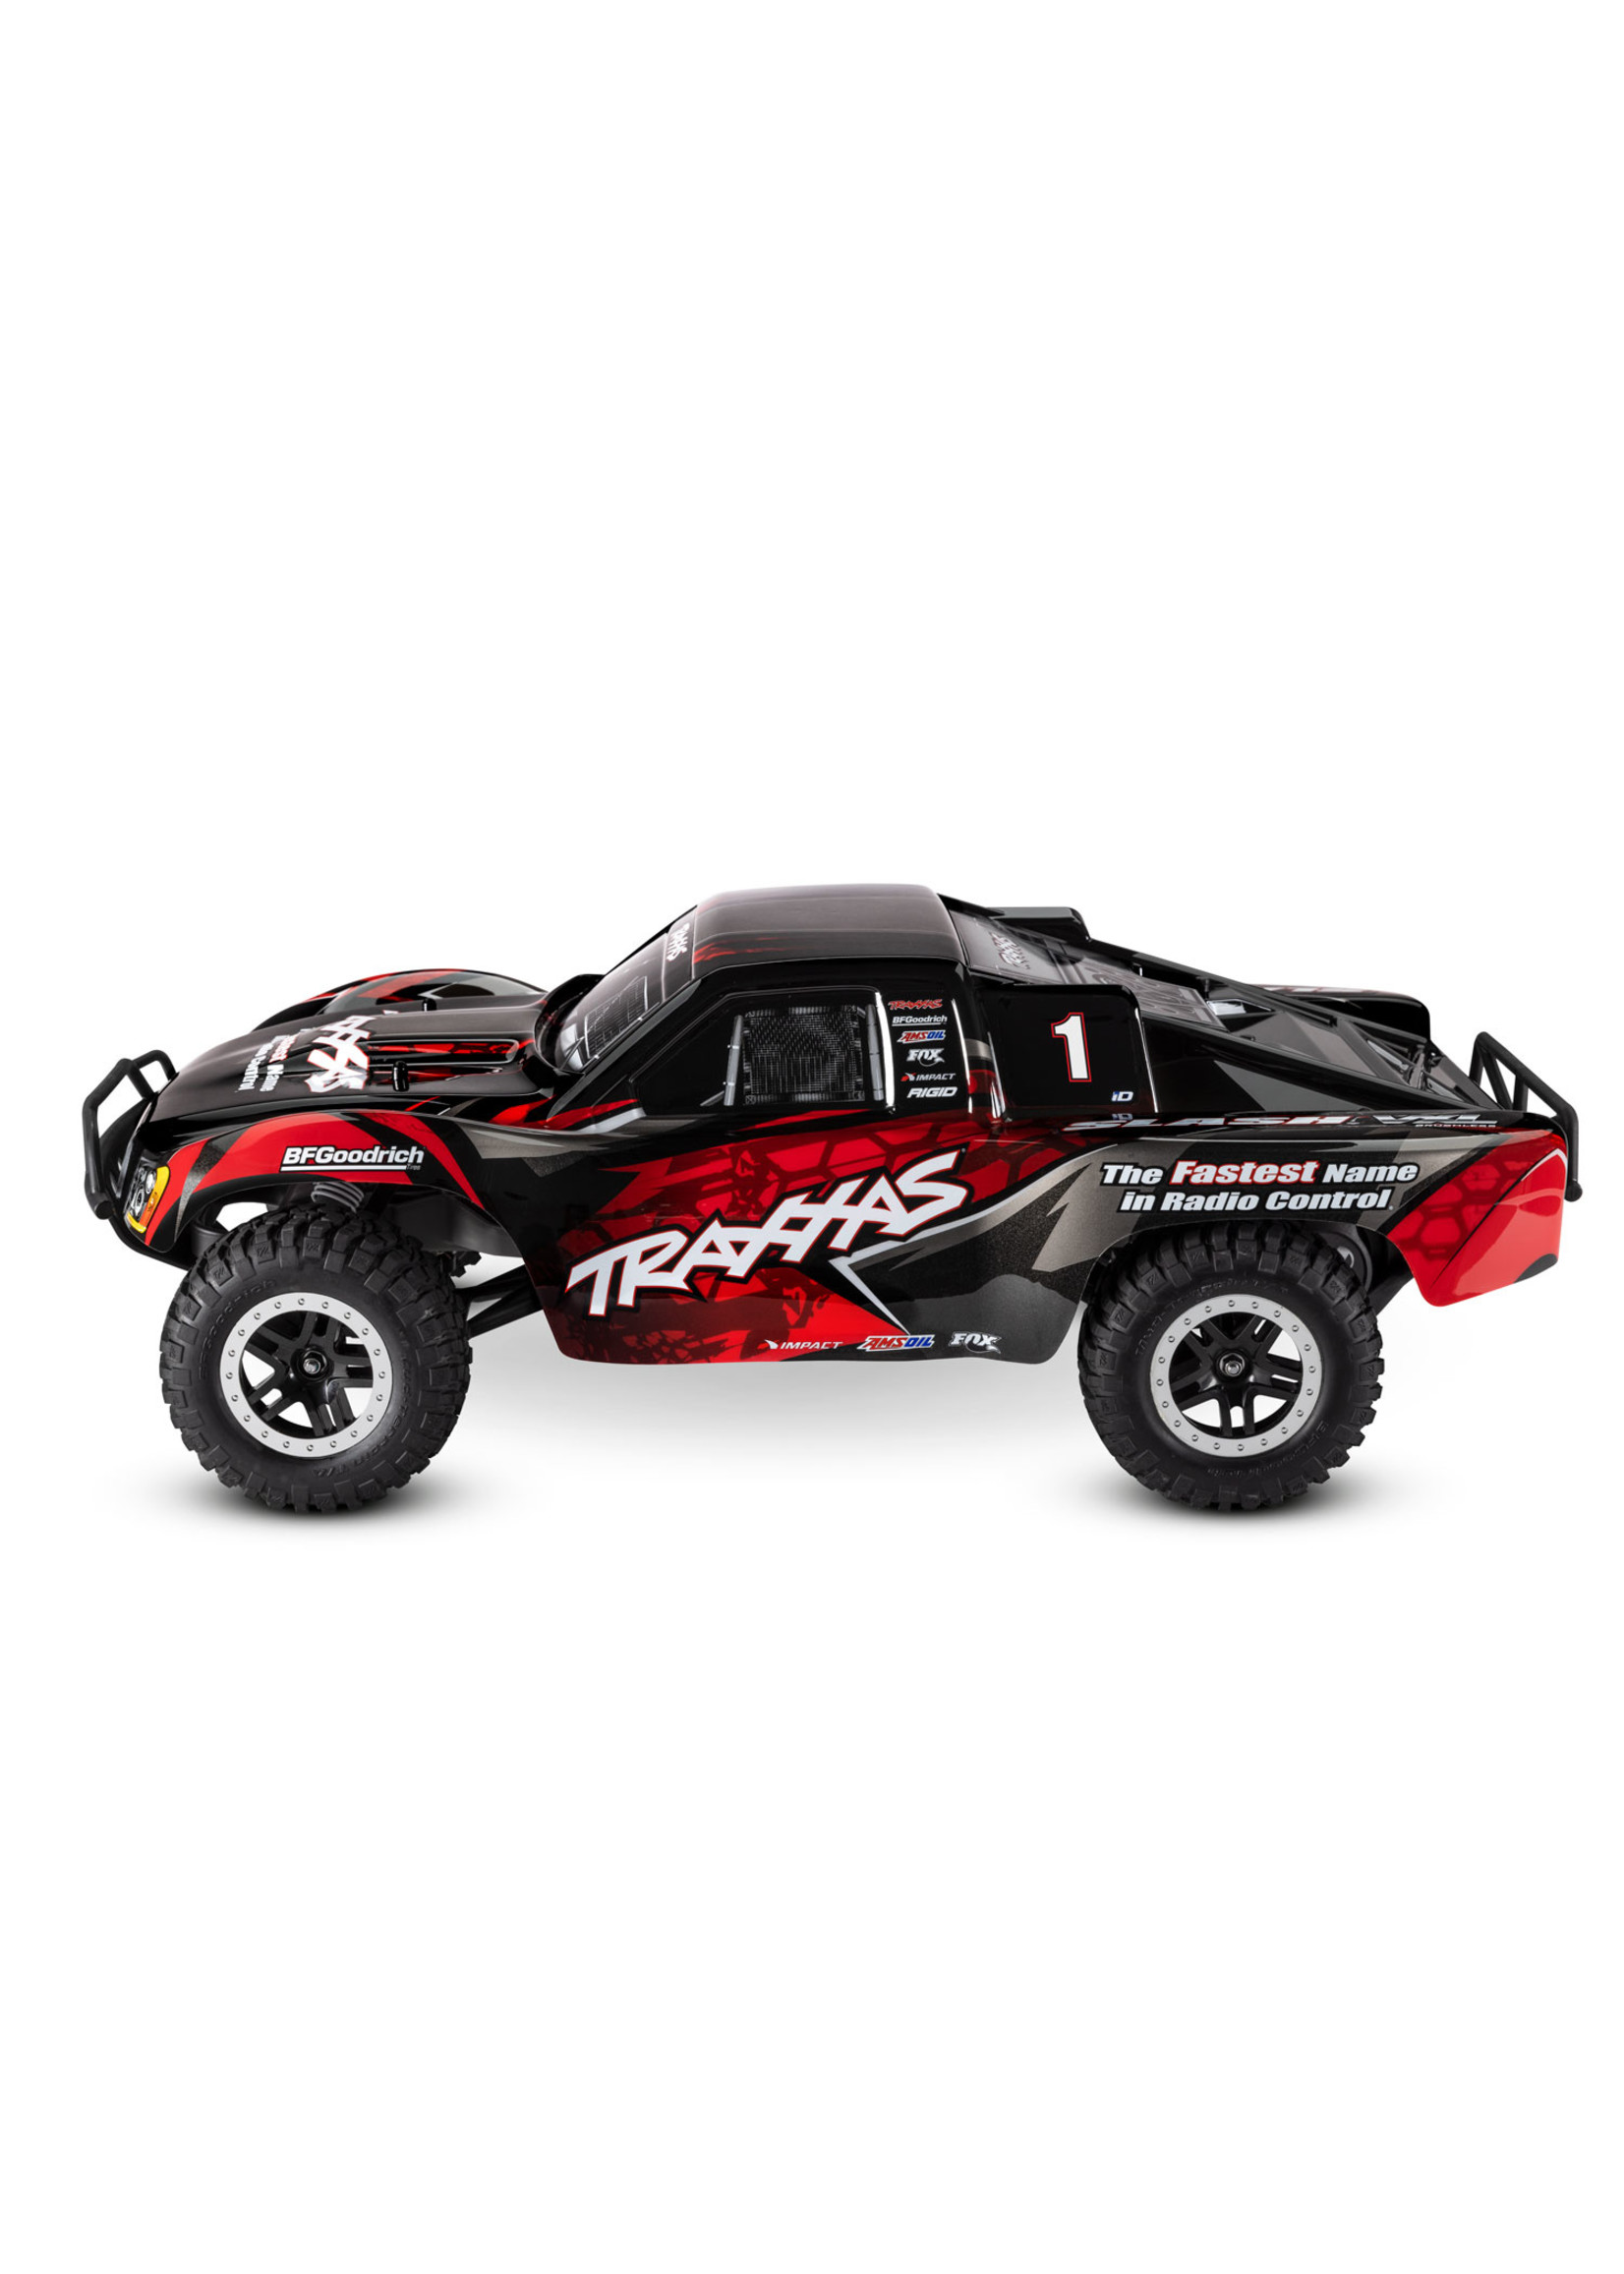 Traxxas 1/10 Slash VXL 2WD RTR Short-Course Truck with Magnum 272R - Red